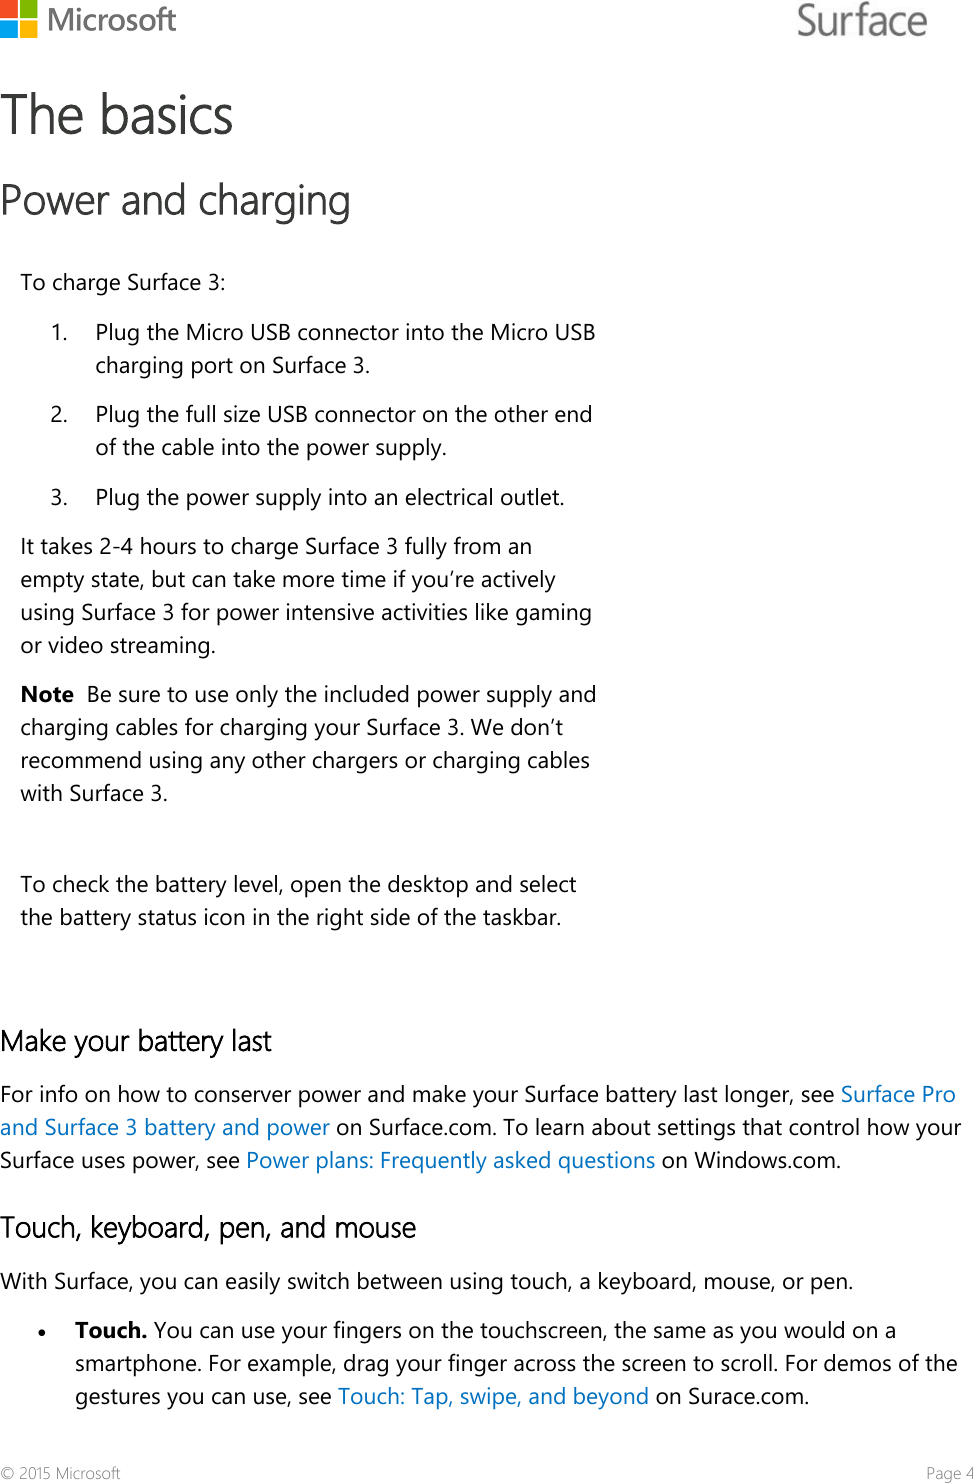    The basics  Power and charging To charge Surface 3: 1. Plug the Micro USB connector into the Micro USB charging port on Surface 3. 2. Plug the full size USB connector on the other end of the cable into the power supply. 3. Plug the power supply into an electrical outlet.  It takes 2-4 hours to charge Surface 3 fully from an empty state, but can take more time if you’re actively using Surface 3 for power intensive activities like gaming or video streaming. Note  Be sure to use only the included power supply and charging cables for charging your Surface 3. We don’t recommend using any other chargers or charging cables with Surface 3.  To check the battery level, open the desktop and select the battery status icon in the right side of the taskbar.   Make your battery last  For info on how to conserver power and make your Surface battery last longer, see Surface Pro and Surface 3 battery and power on Surface.com. To learn about settings that control how your Surface uses power, see Power plans: Frequently asked questions on Windows.com. Touch, keyboard, pen, and mouse With Surface, you can easily switch between using touch, a keyboard, mouse, or pen.  • Touch. You can use your fingers on the touchscreen, the same as you would on a smartphone. For example, drag your finger across the screen to scroll. For demos of the gestures you can use, see Touch: Tap, swipe, and beyond on Surace.com. © 2015 Microsoft    Page 4 